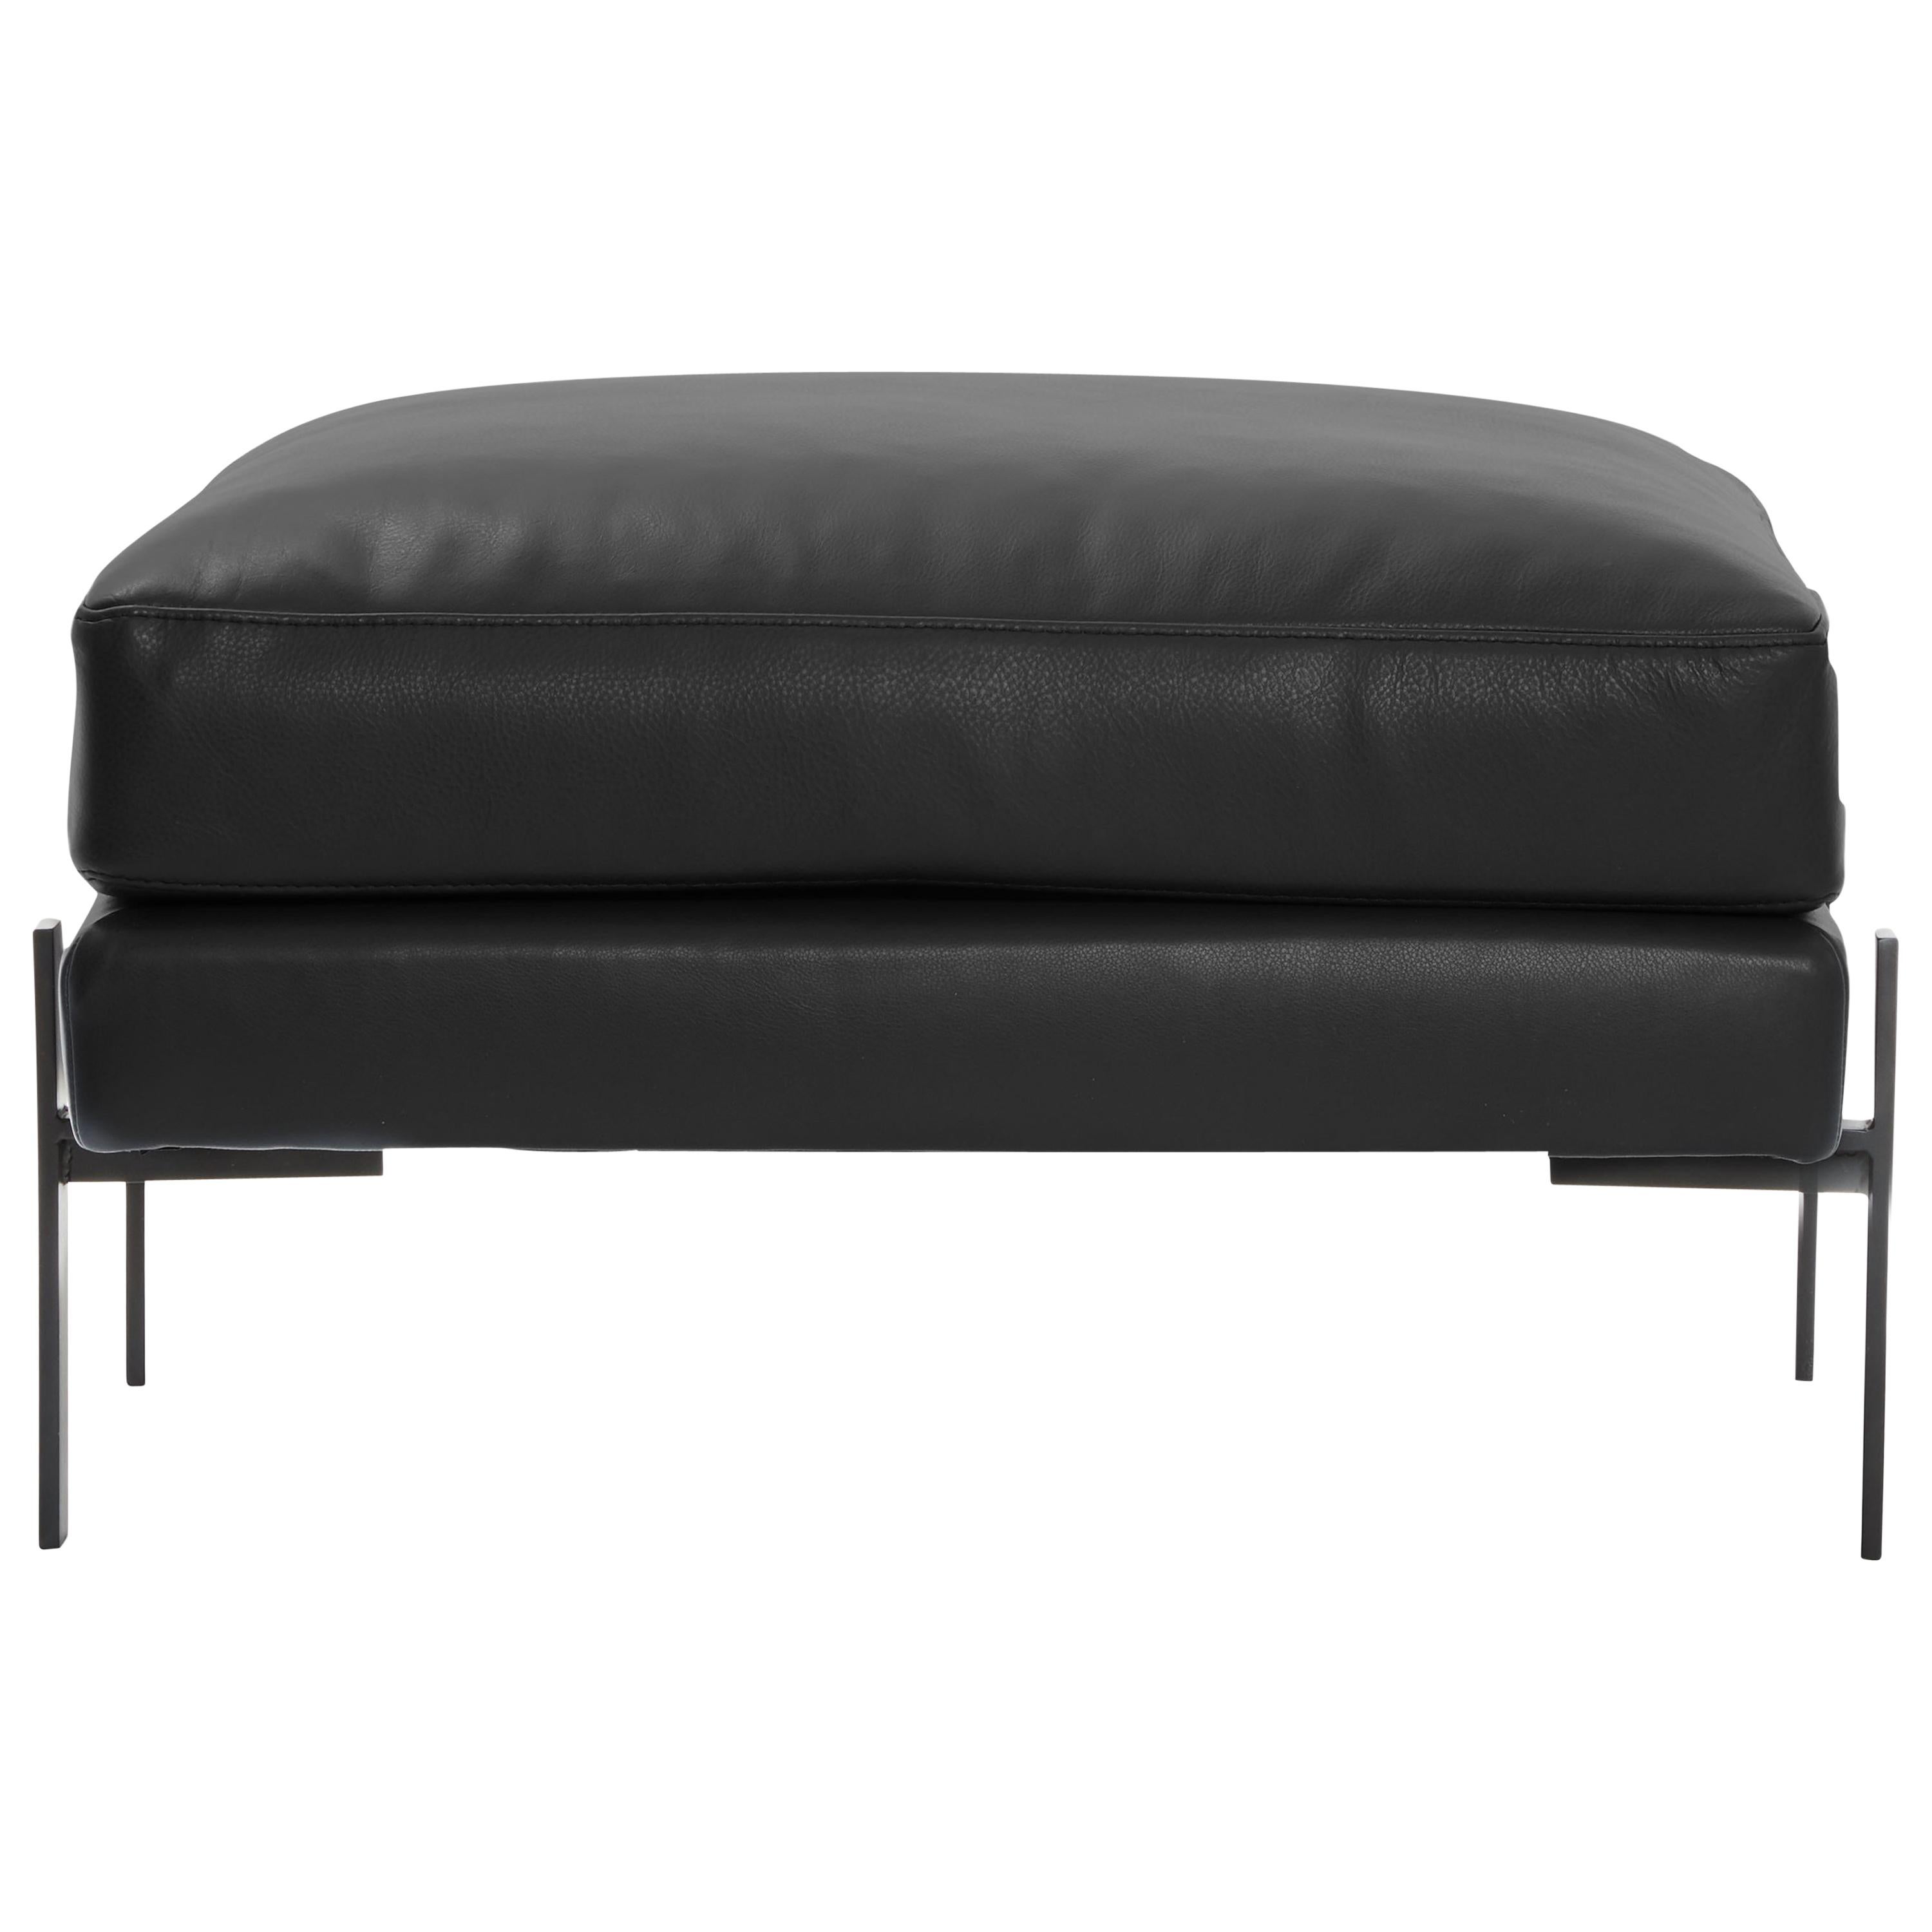 Truss Ottoman in Mixed-Media Midnight and Bayou by TRNK im Angebot